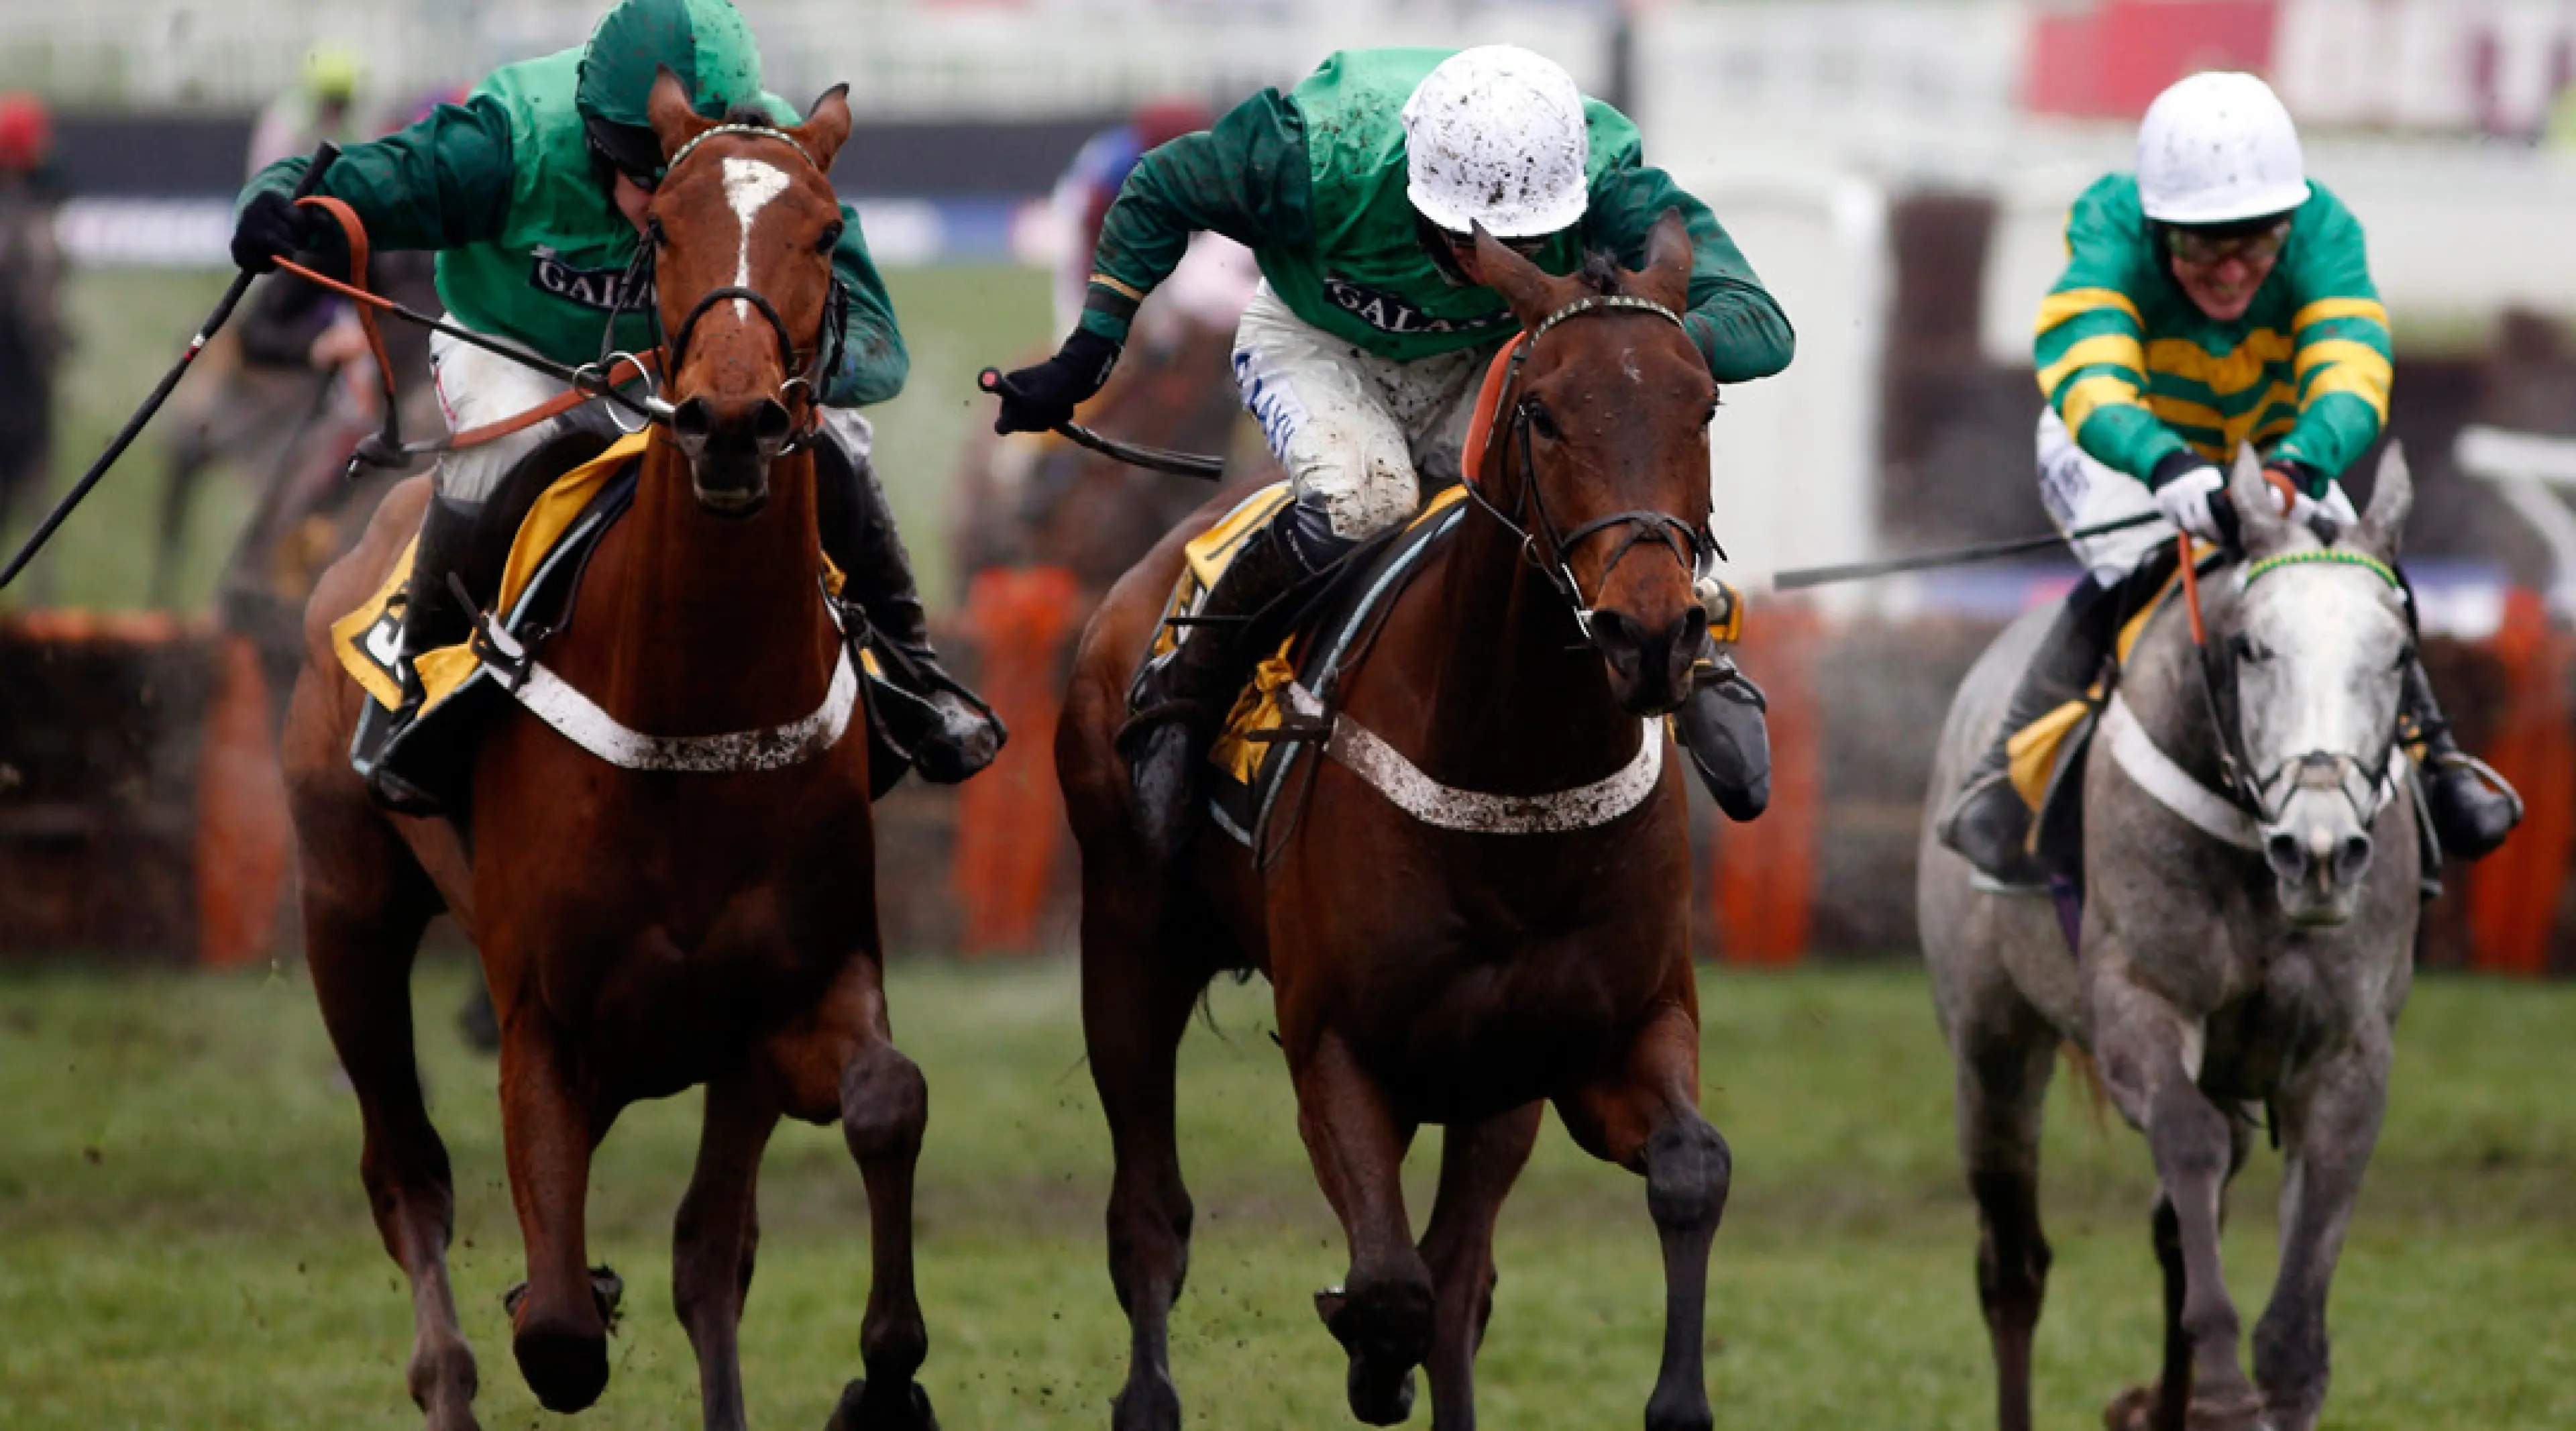 Peace and Co (L) on the way to Triumph Hurdle victory